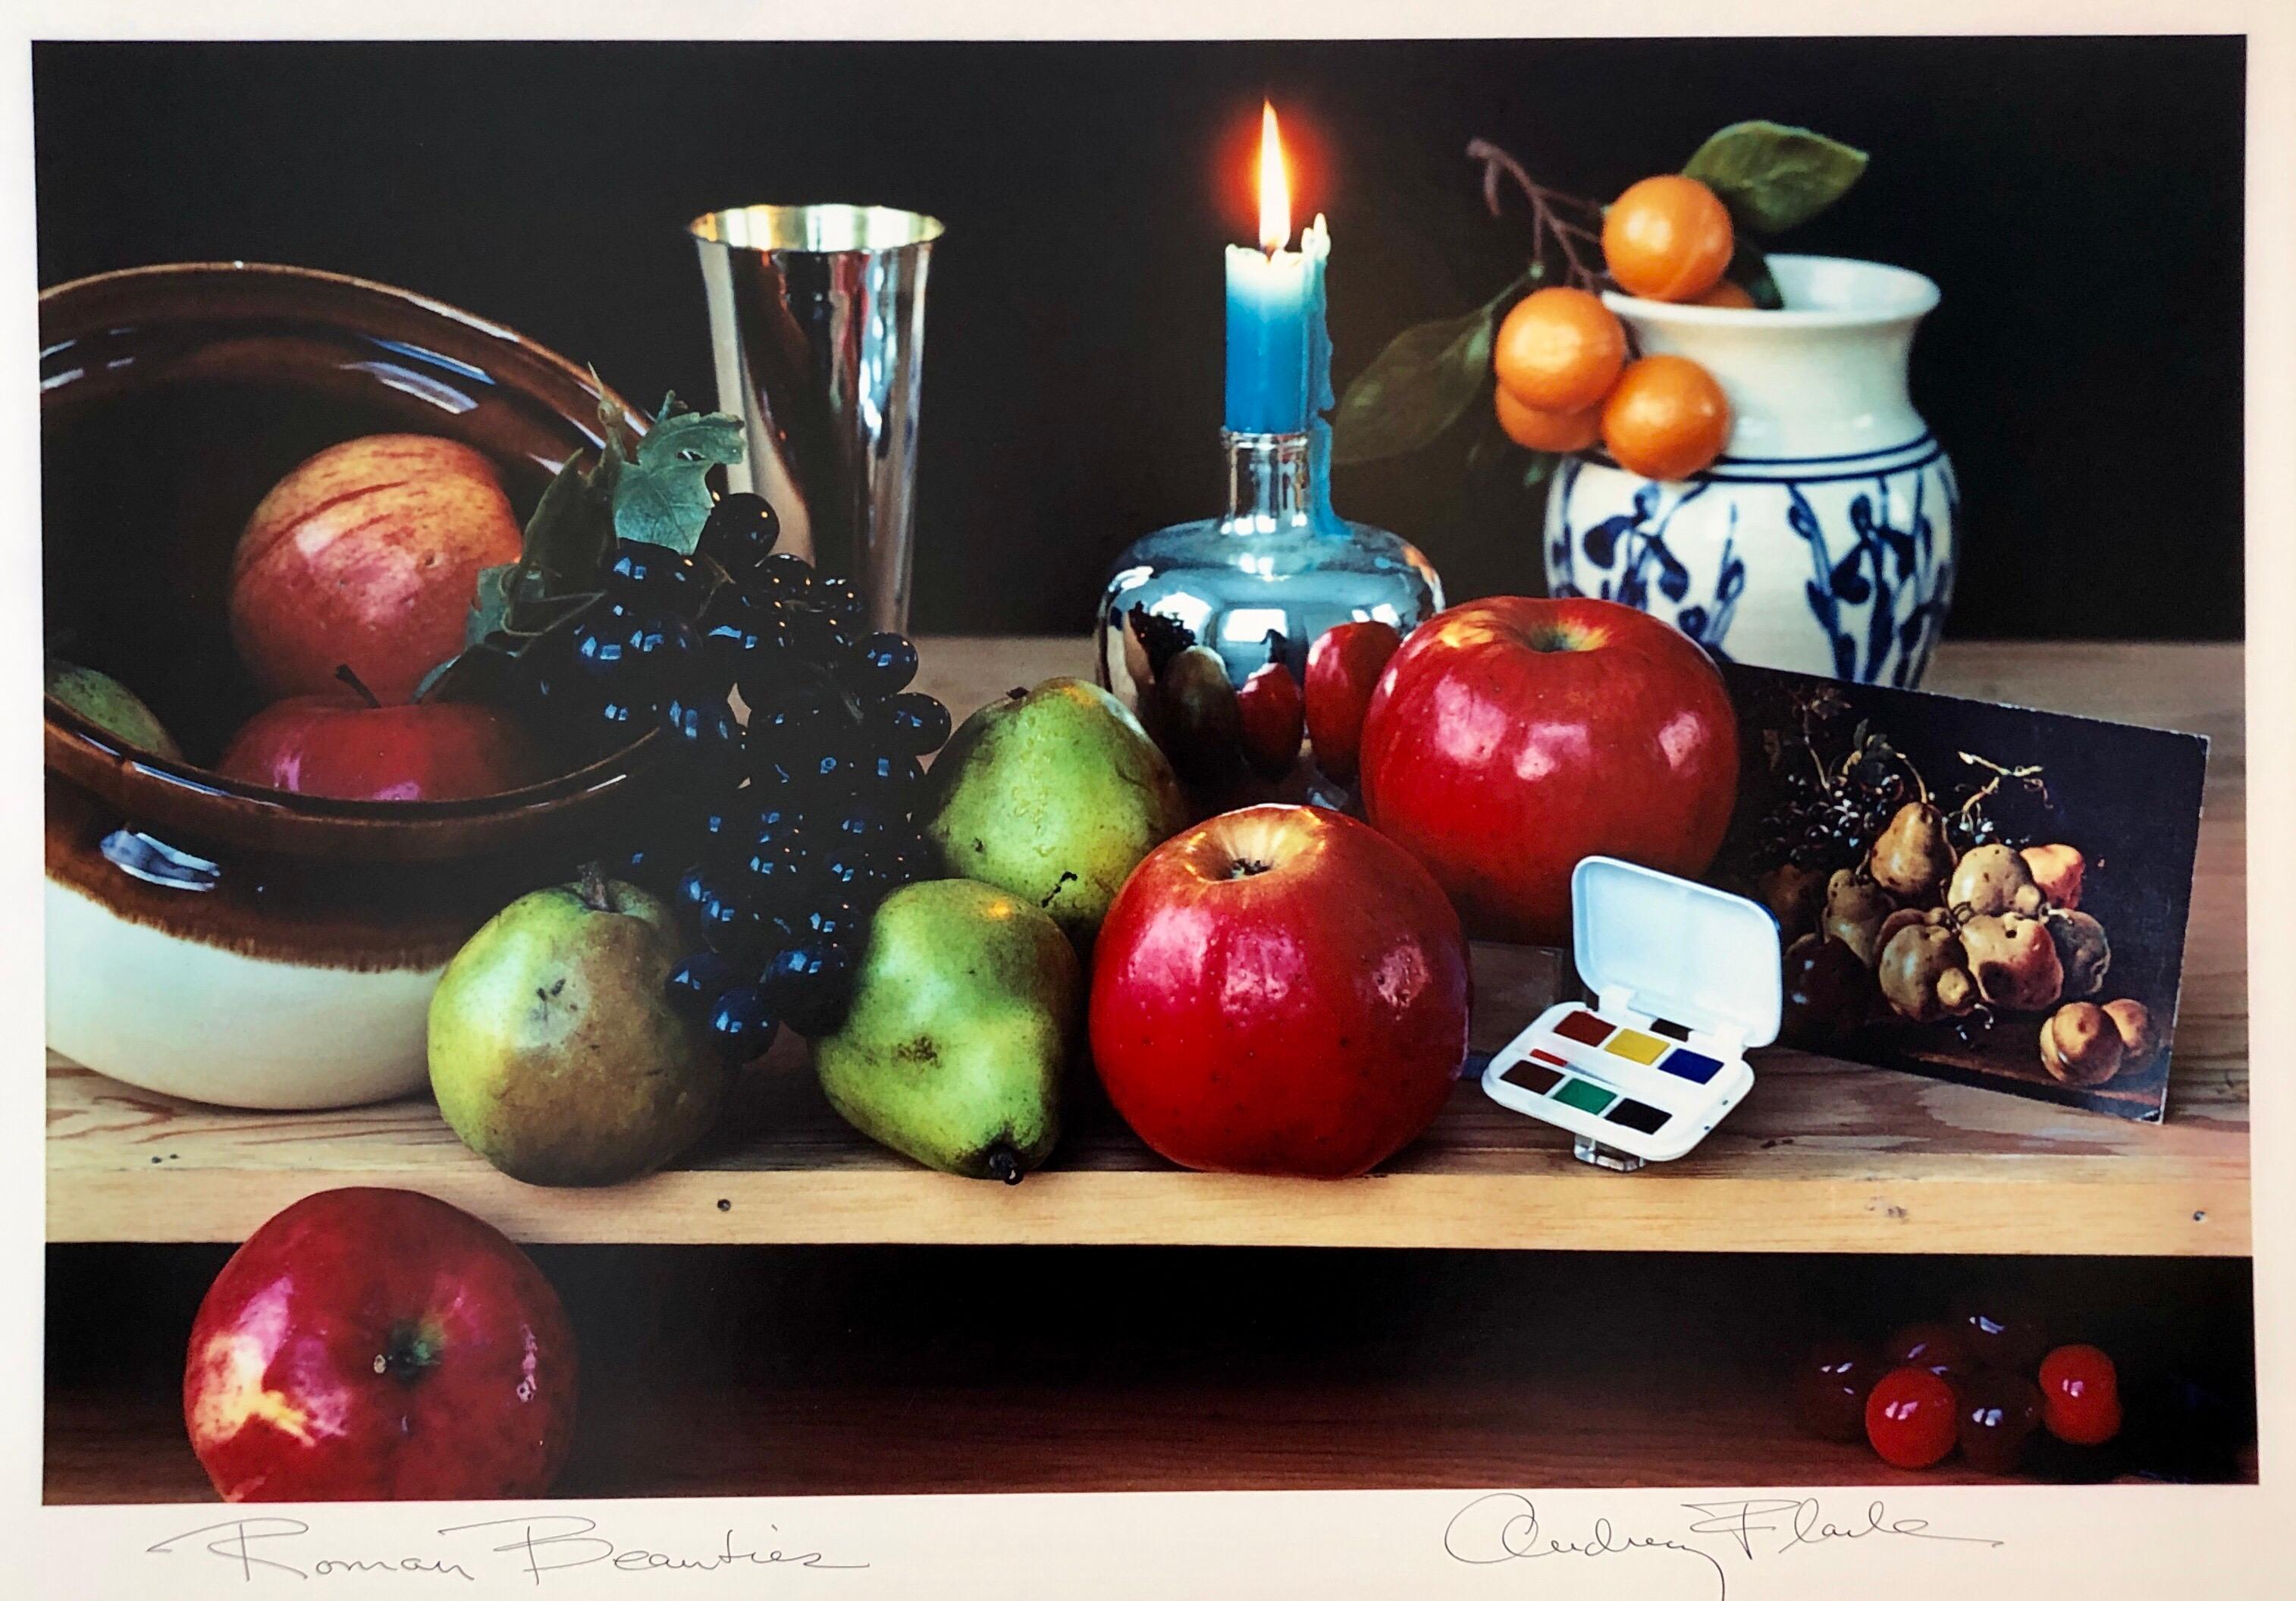 Hand signed and titled in ink by the artist from edition of 50 (plus proofs). Color Photo printed at CVI Lab by master printer Guy Stricherz. Published by Prestige Art Ltd. From the color saturated 1980's. "Roman Beauties" featuring apples, pears,